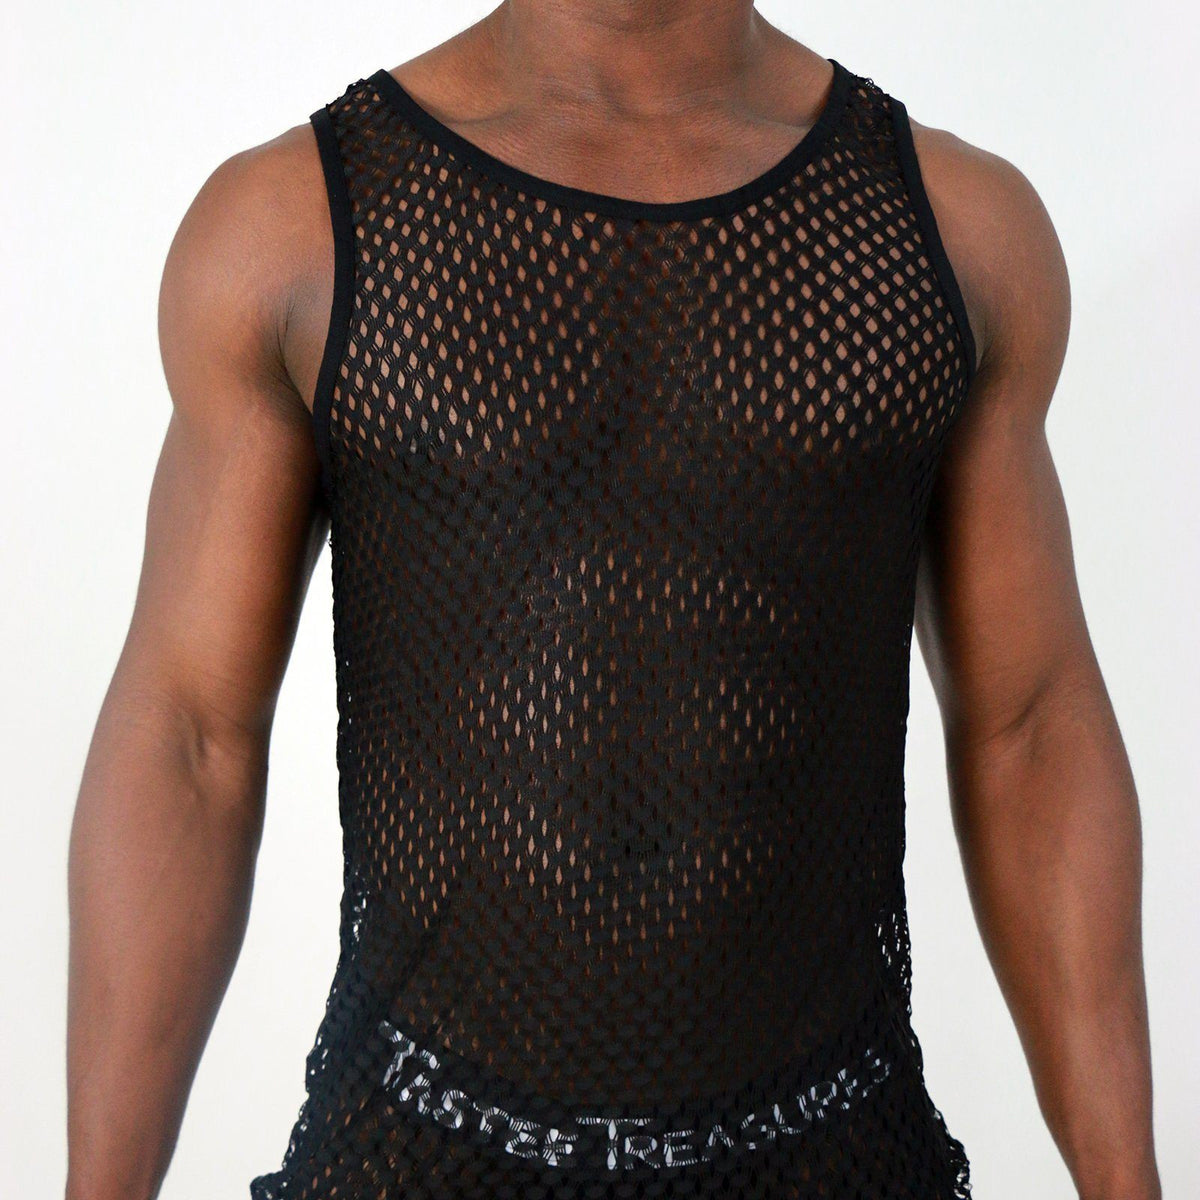 Midnight Mesh Tank Top *Limited Edition* Tops and Shirts TasteeTreasures 